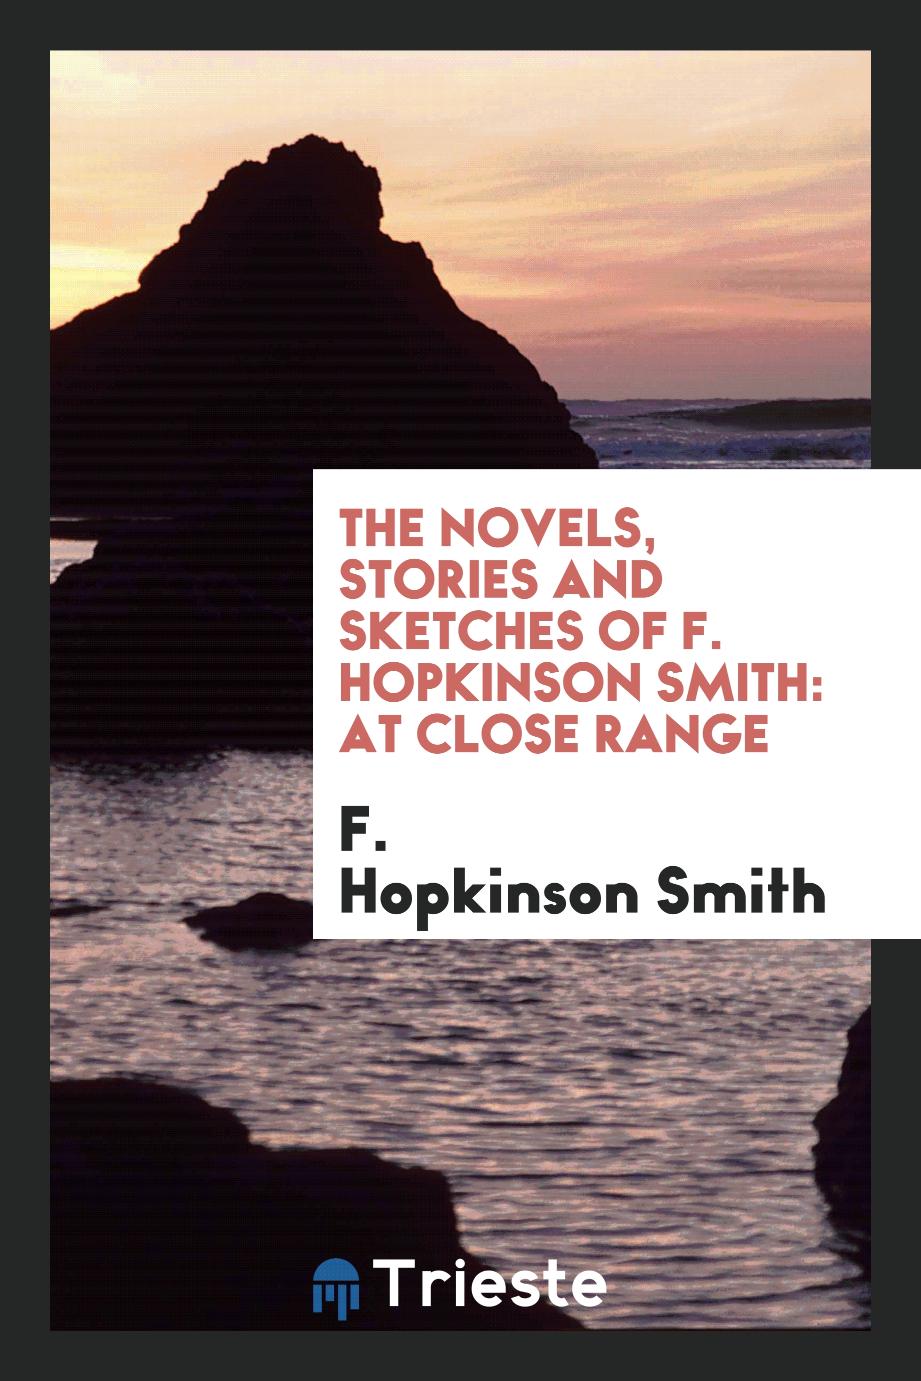 The Novels, Stories and Sketches of F. Hopkinson Smith: At Close Range